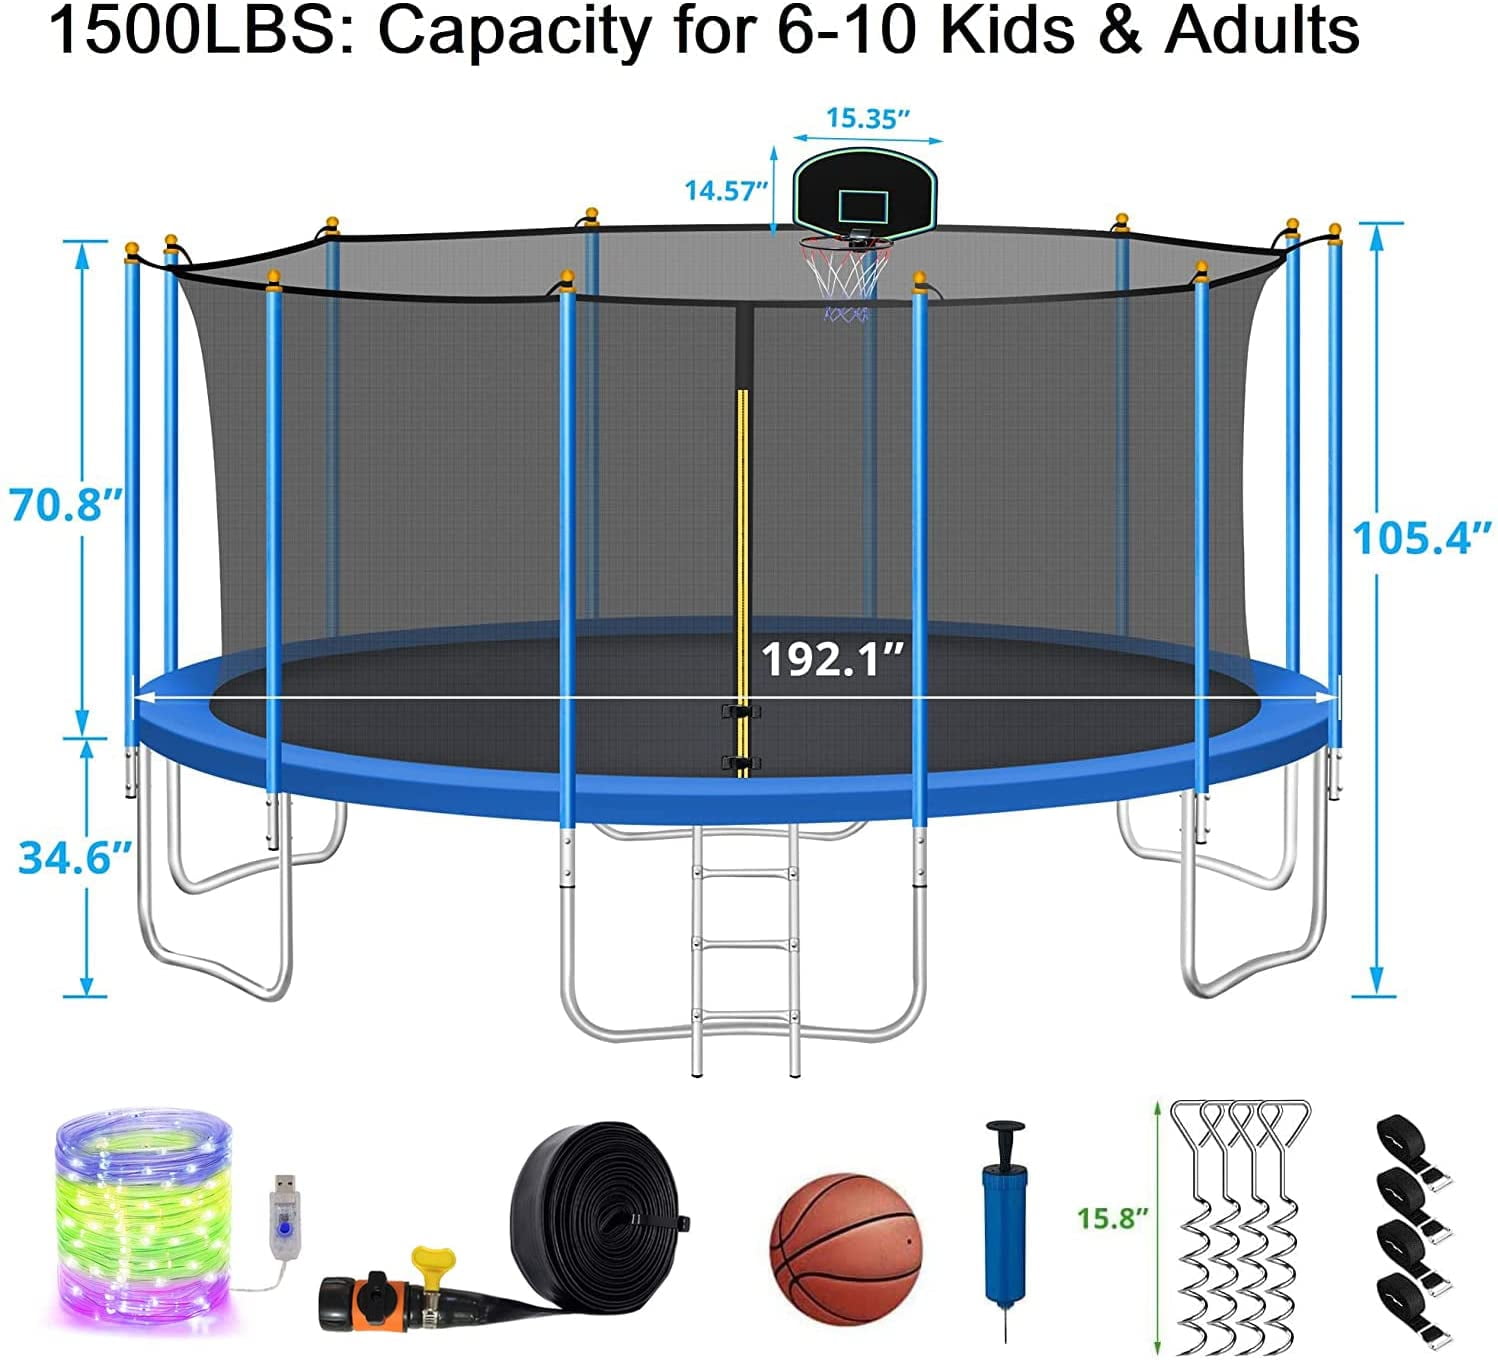 Spring Pad Mat Capacity for 10 Kids ASTM Approved Basketball Hoop and Ball Ladder LHX 1500LBS Tranpoline for Adults 16FT Tranpoline with Safety Enclosure Net 